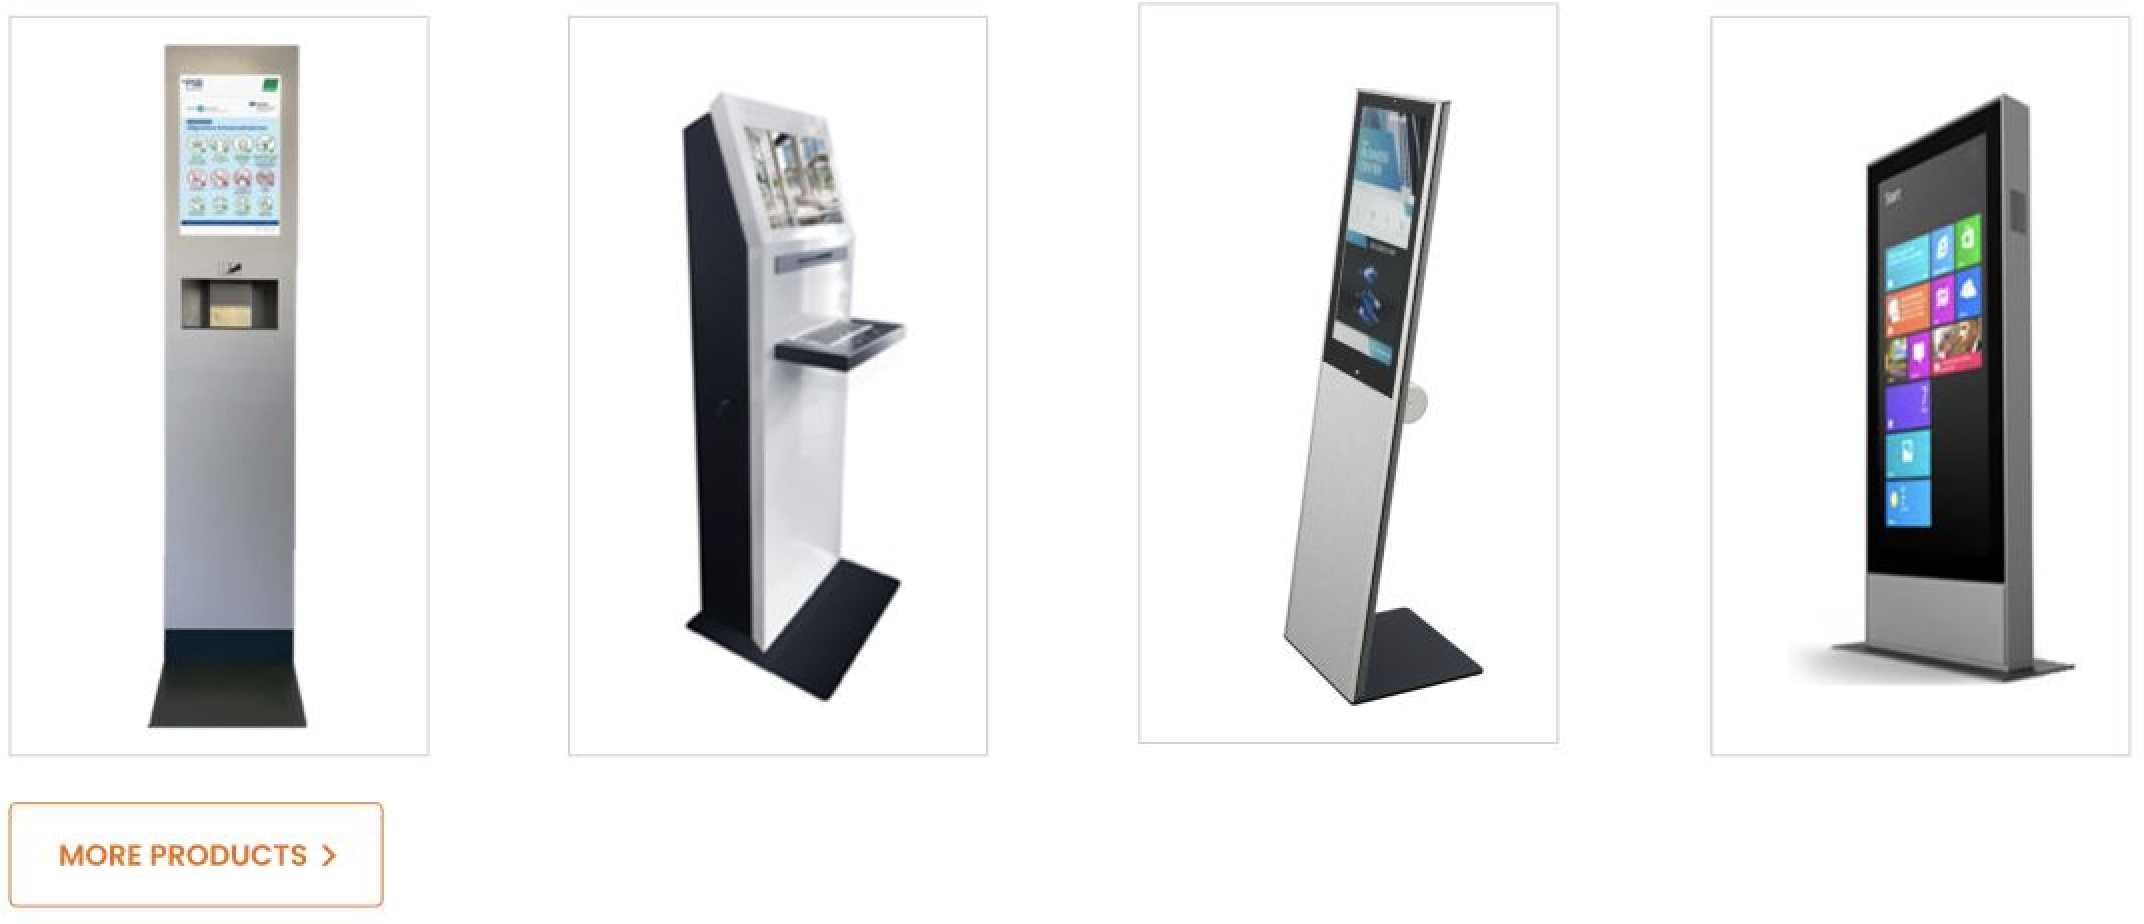 friendlyway's state-of-the-art kiosks and digital signage hardware have been setting trends in the industry for over 23 years